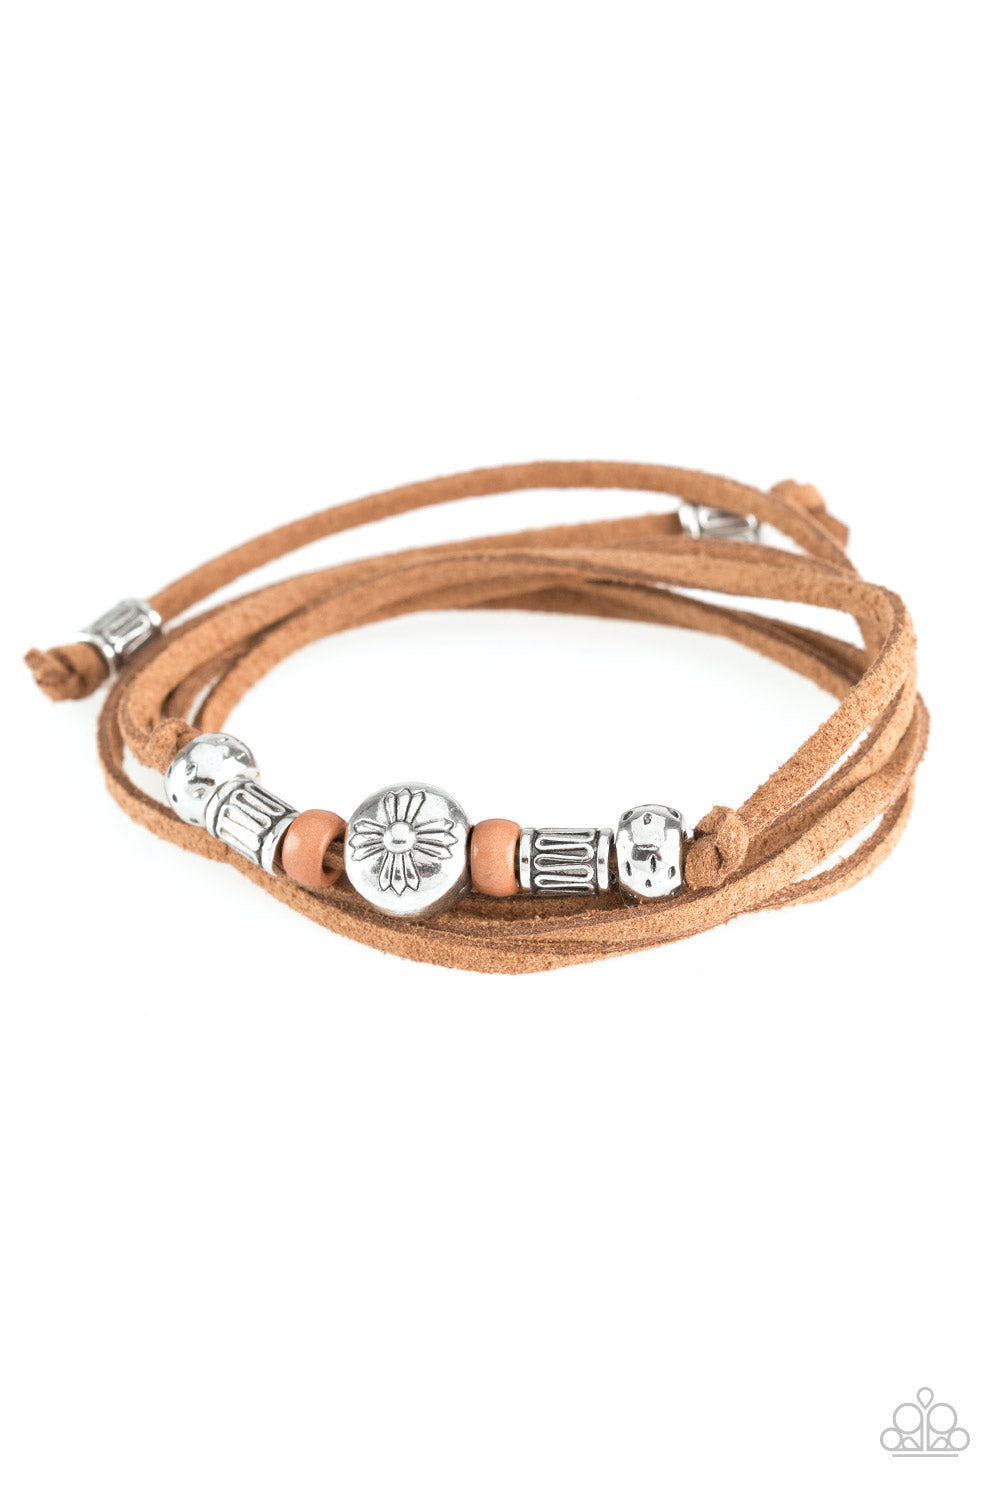 FIND YOUR WAY - BROWN LEATHER WRAP AROUND BRACELET